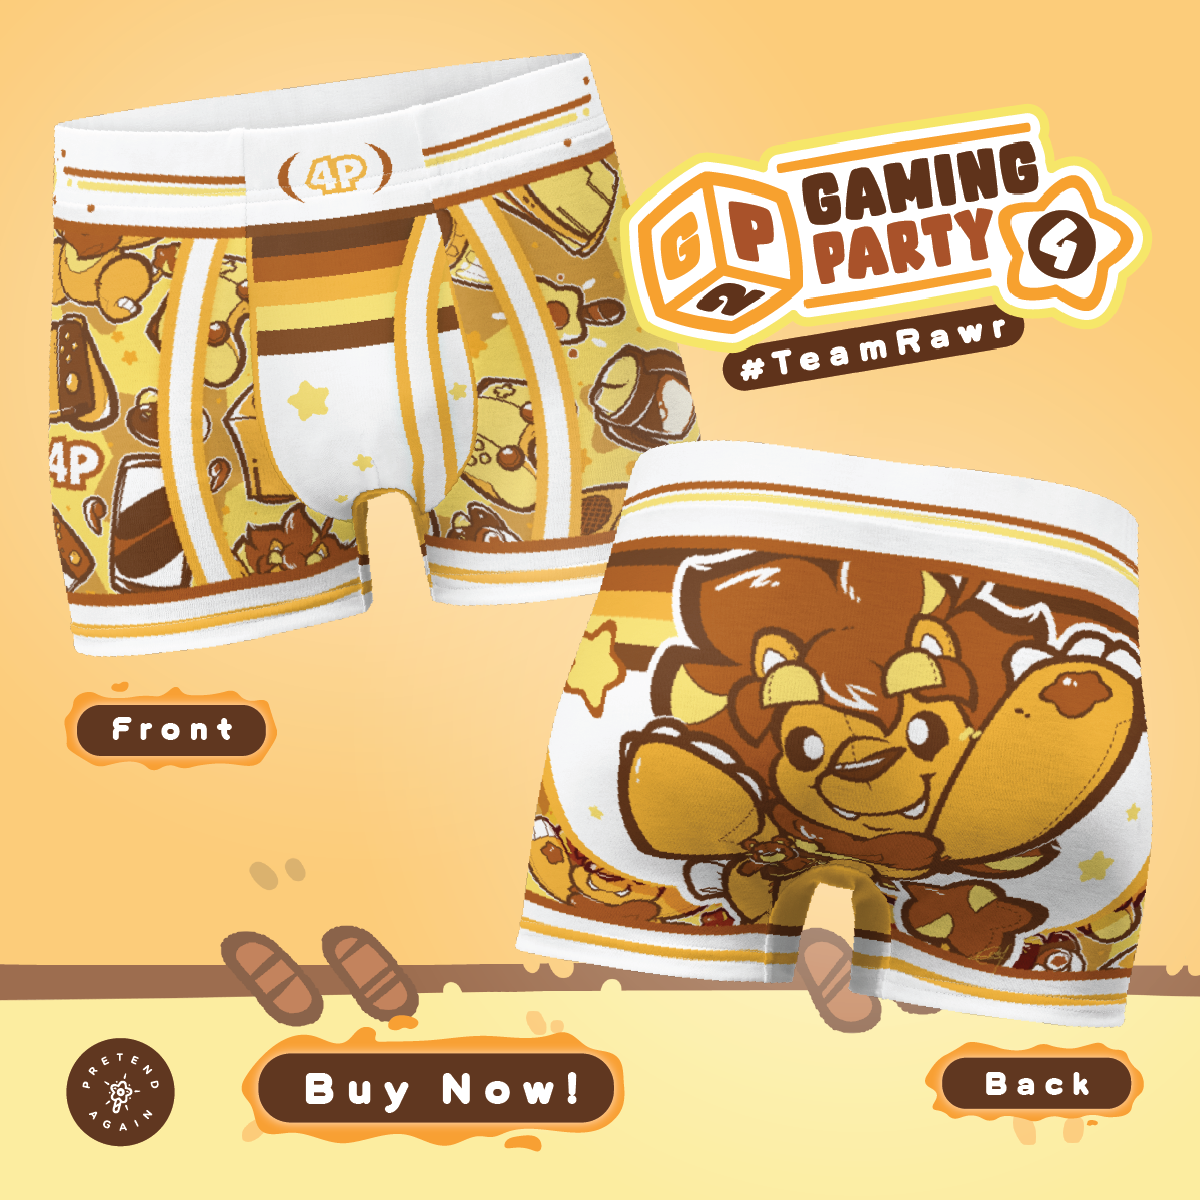 Gaming Party 2 - Toy Trunks - #TeamRawr